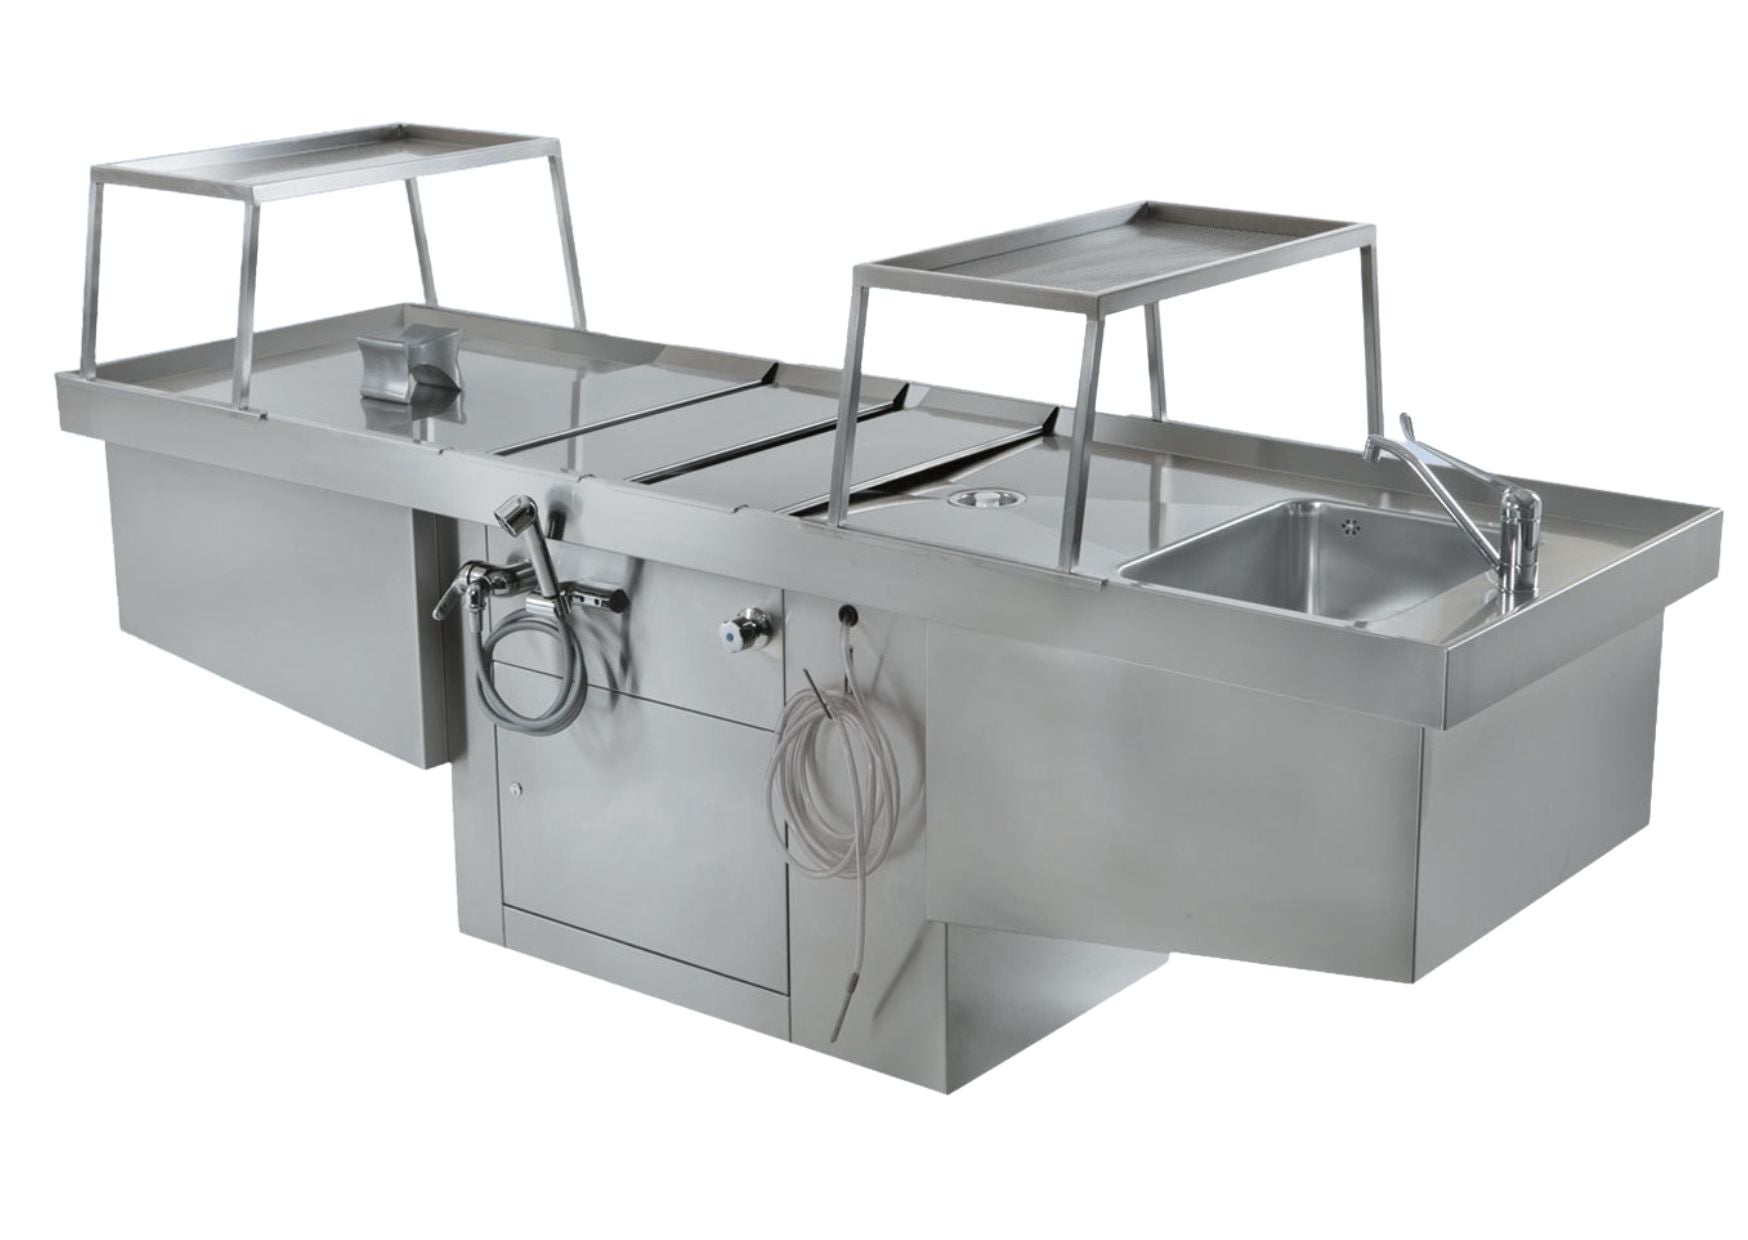 Stainless steel autopsy table with organ basin